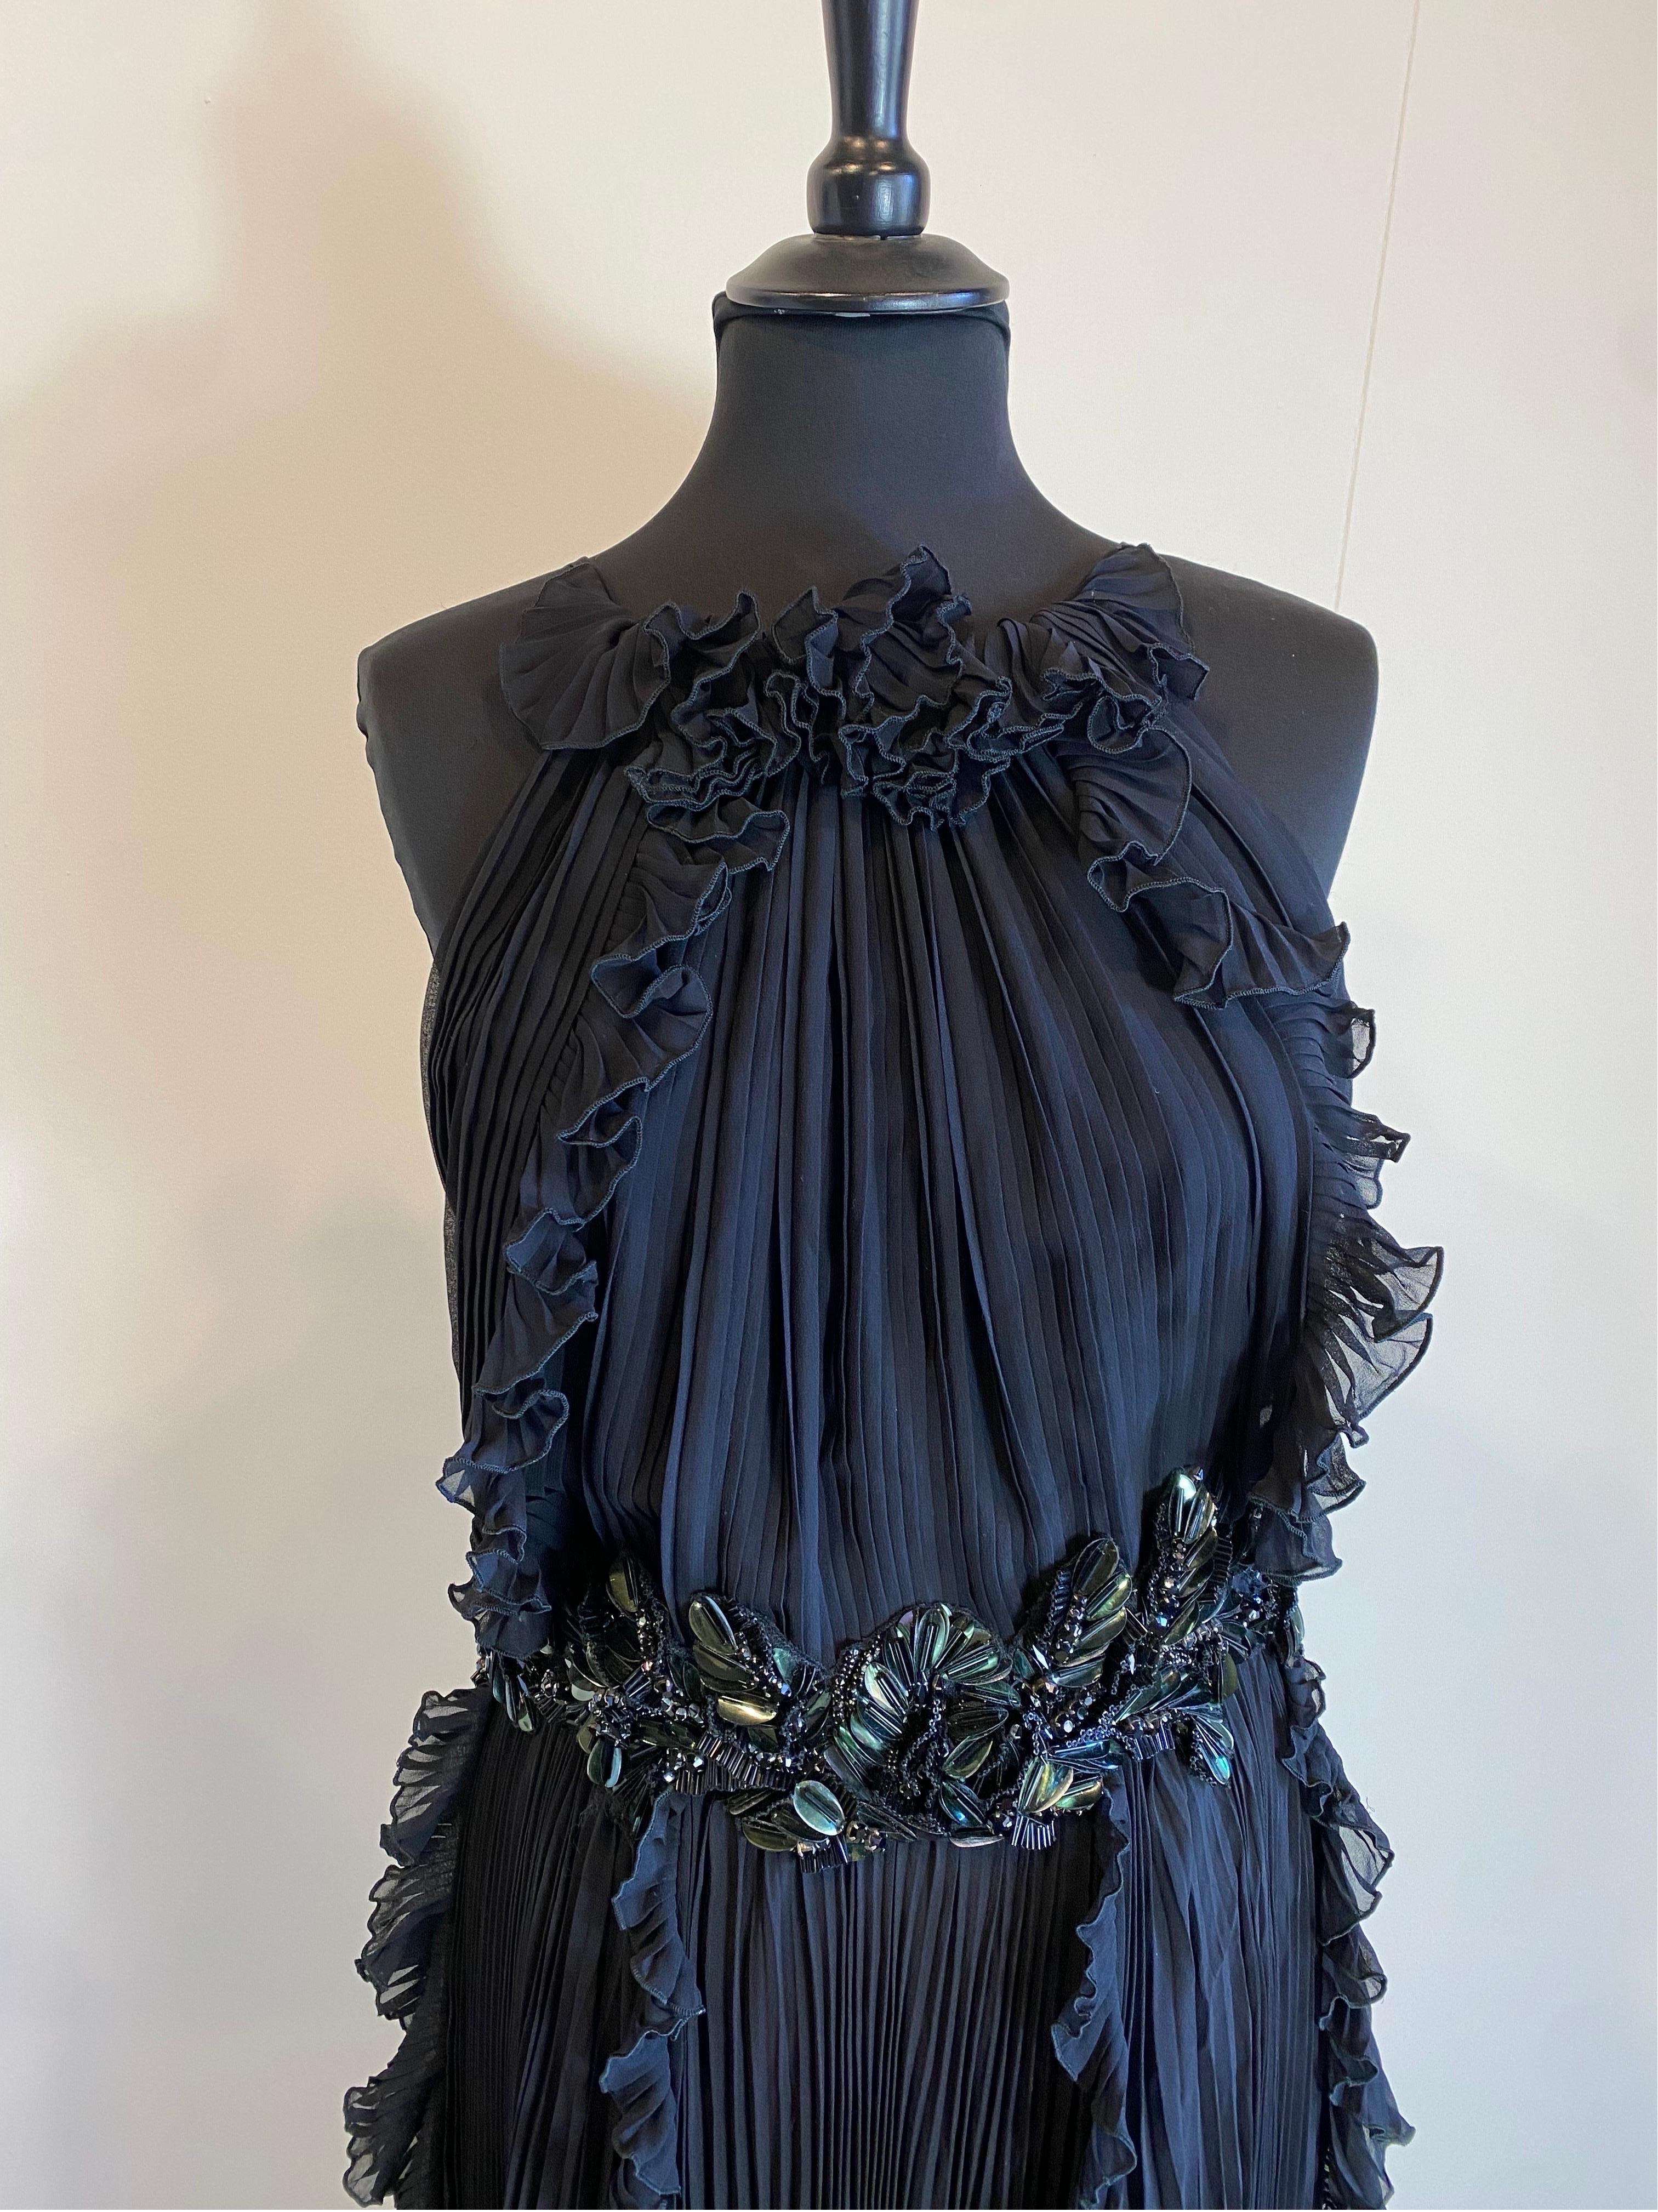 Gucci Cruise 2013 Black long Night Dress In Excellent Condition For Sale In Carnate, IT